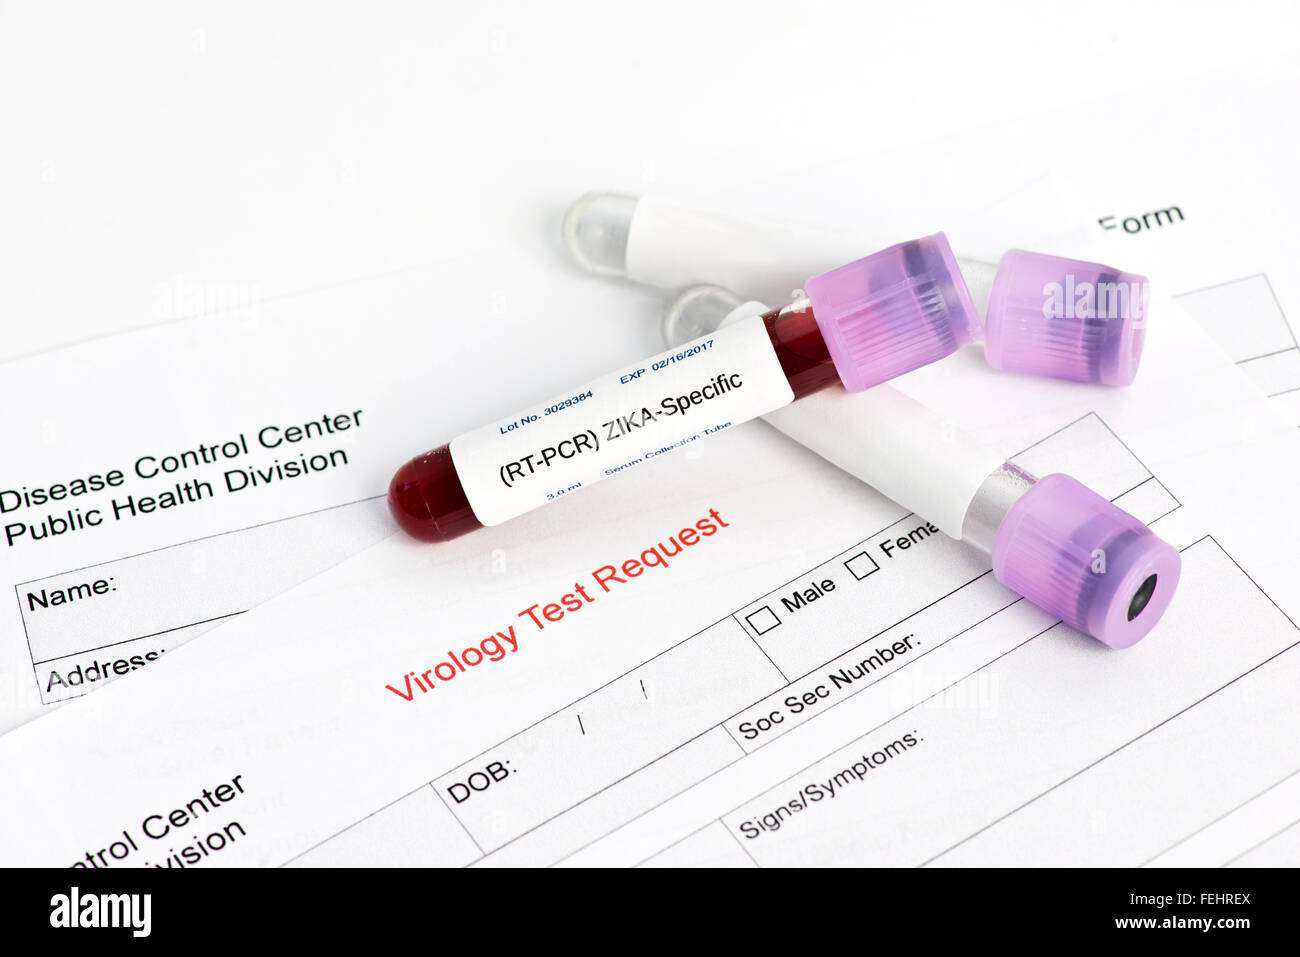 Zika virus blood analysis collection tube with virology lab request.  Labels, document done by photographer and are fake. Stock Photo